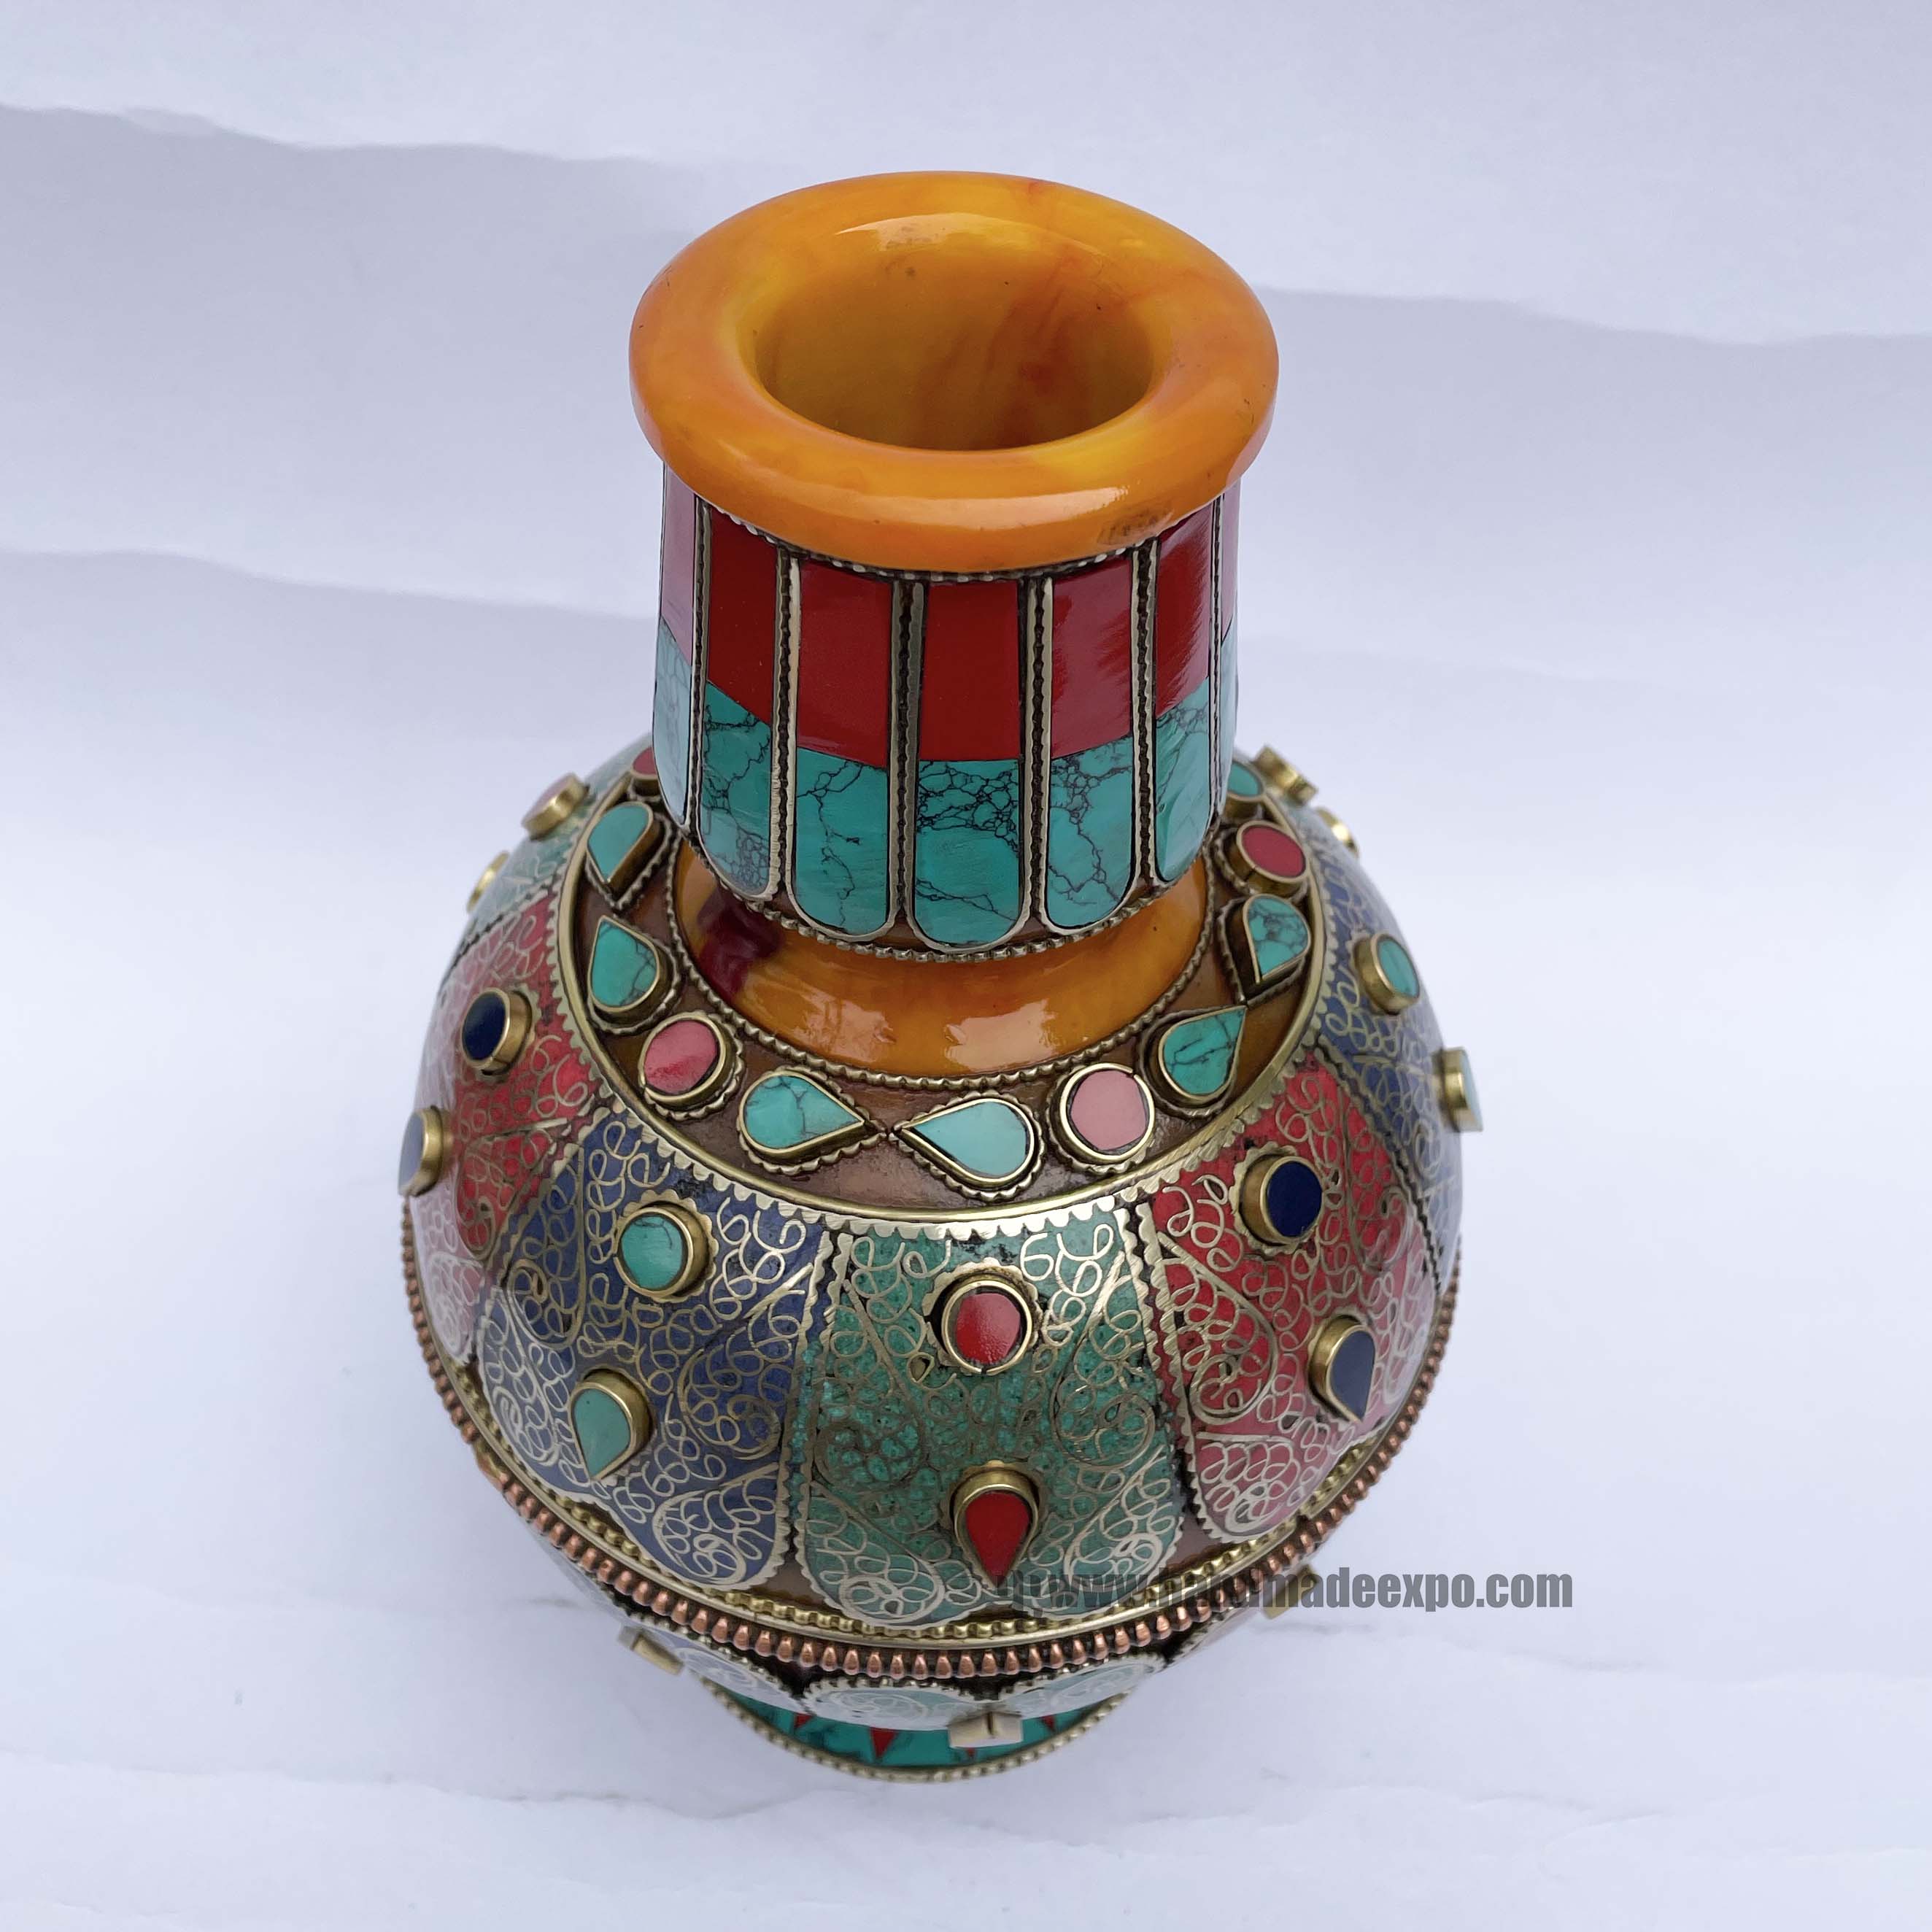 Imitation Amber Flower Vase With tourquise, Coral And Lapis Stone And metal Setting